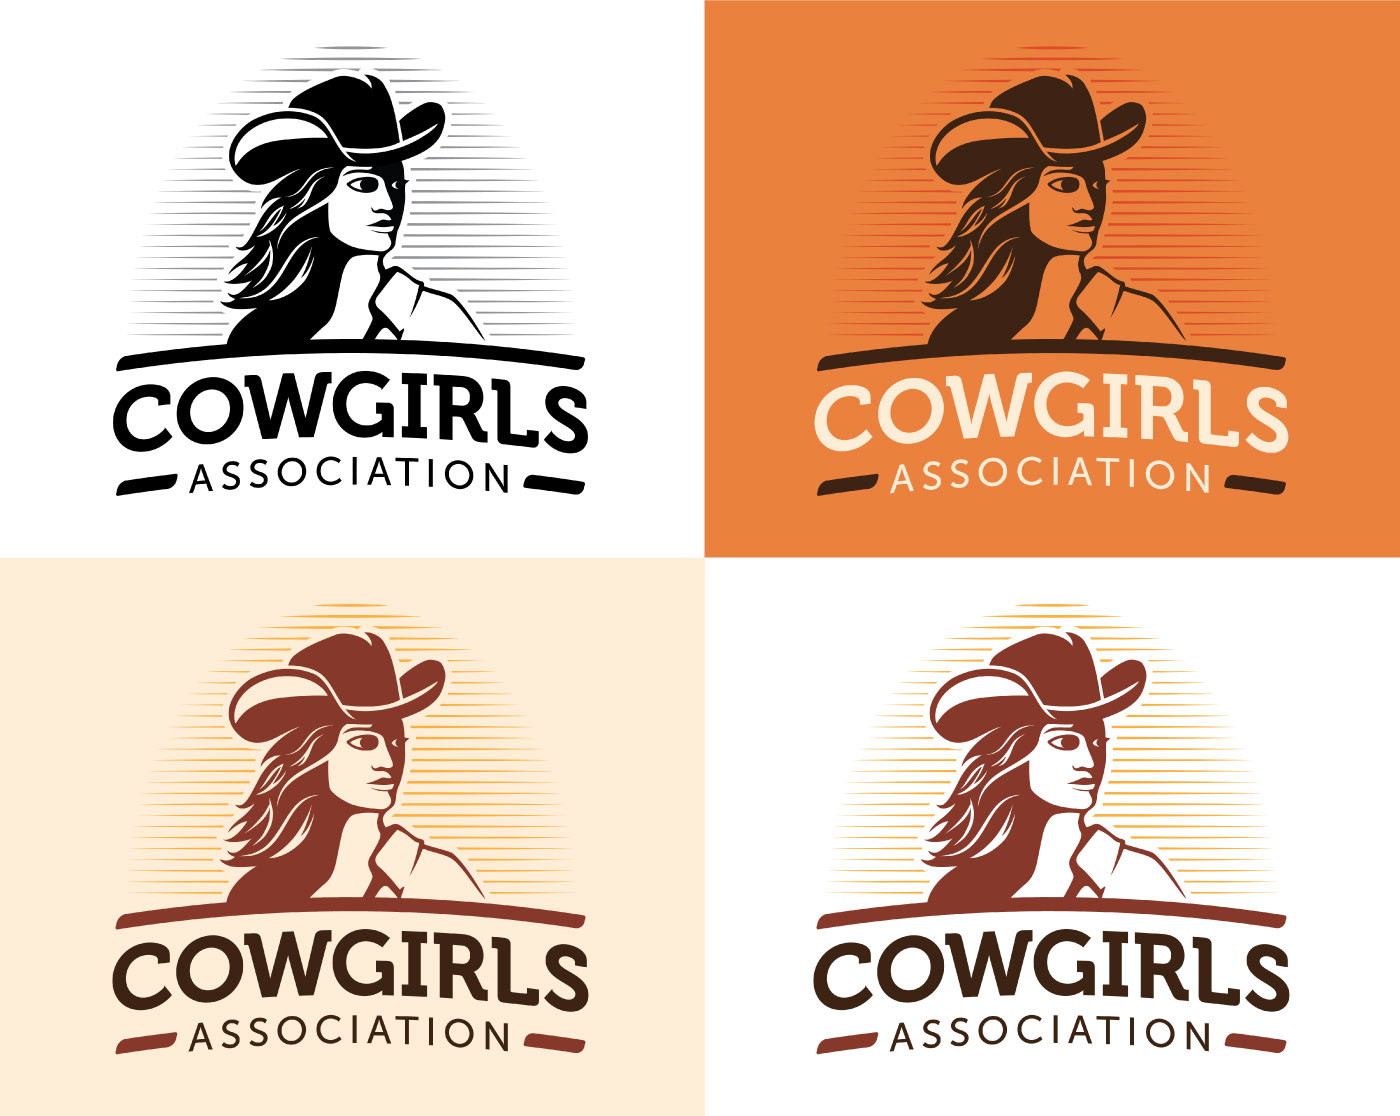 American Culture cowgirls Girl Power logo New Organisation Texas culture update west western Woman Power